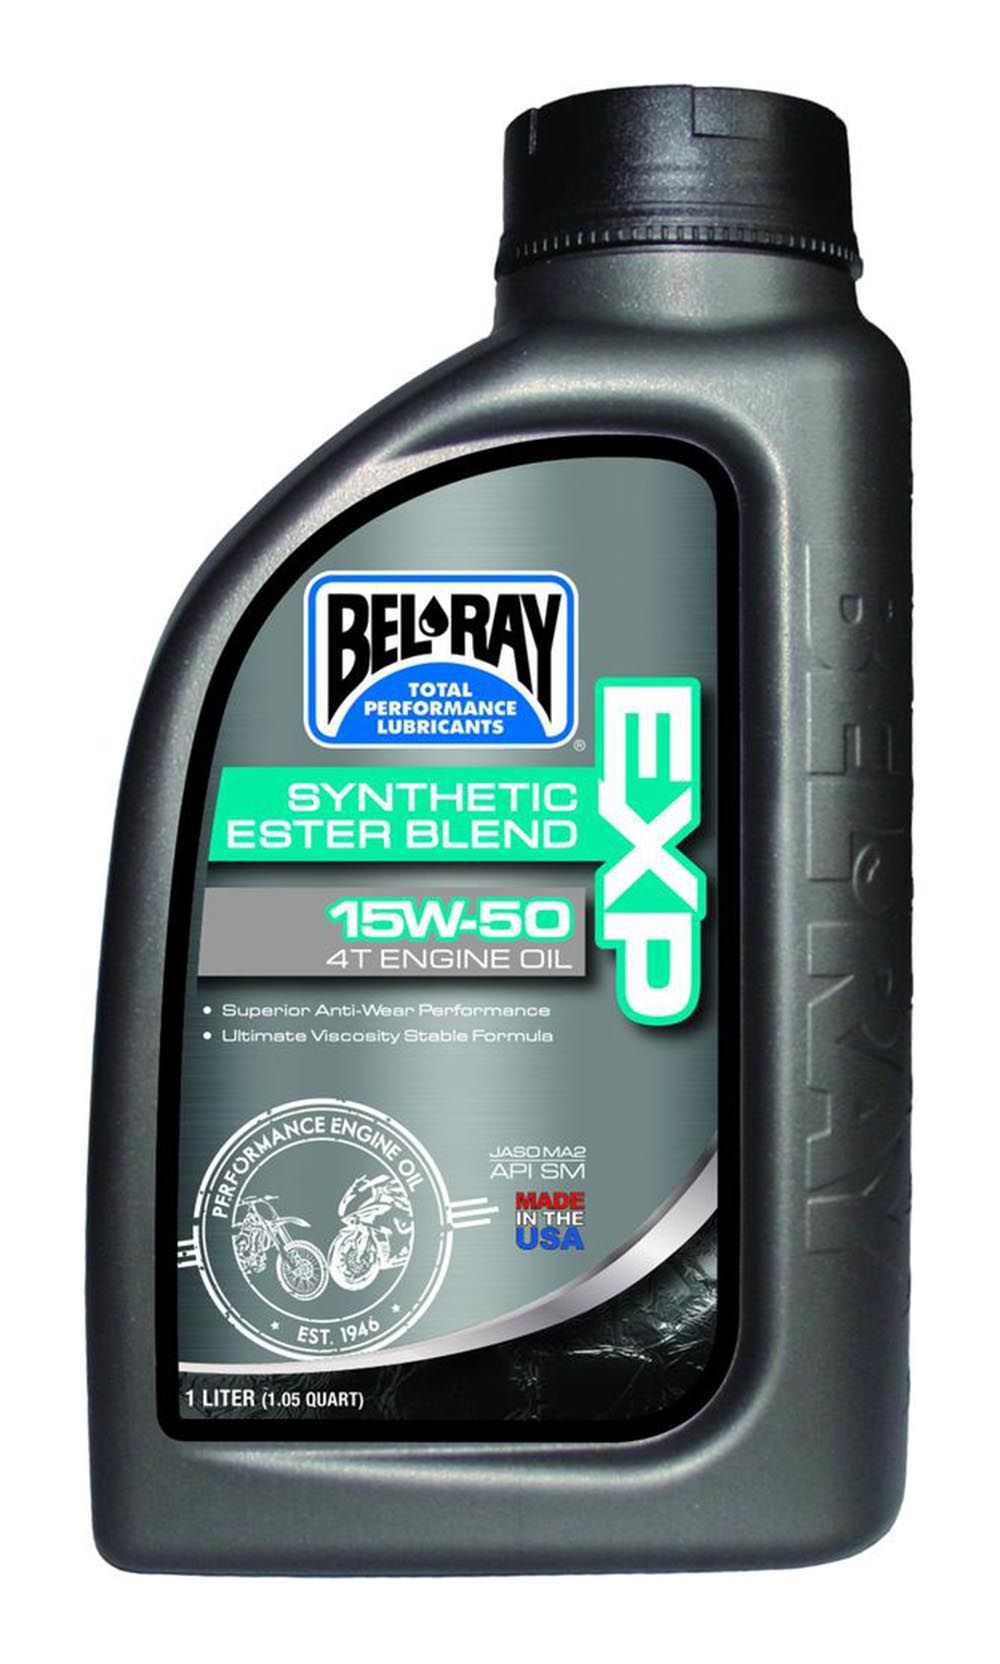 Bel-Ray EXP Synthetic Ester Blend 4T Oil 15W-50 1 Liter